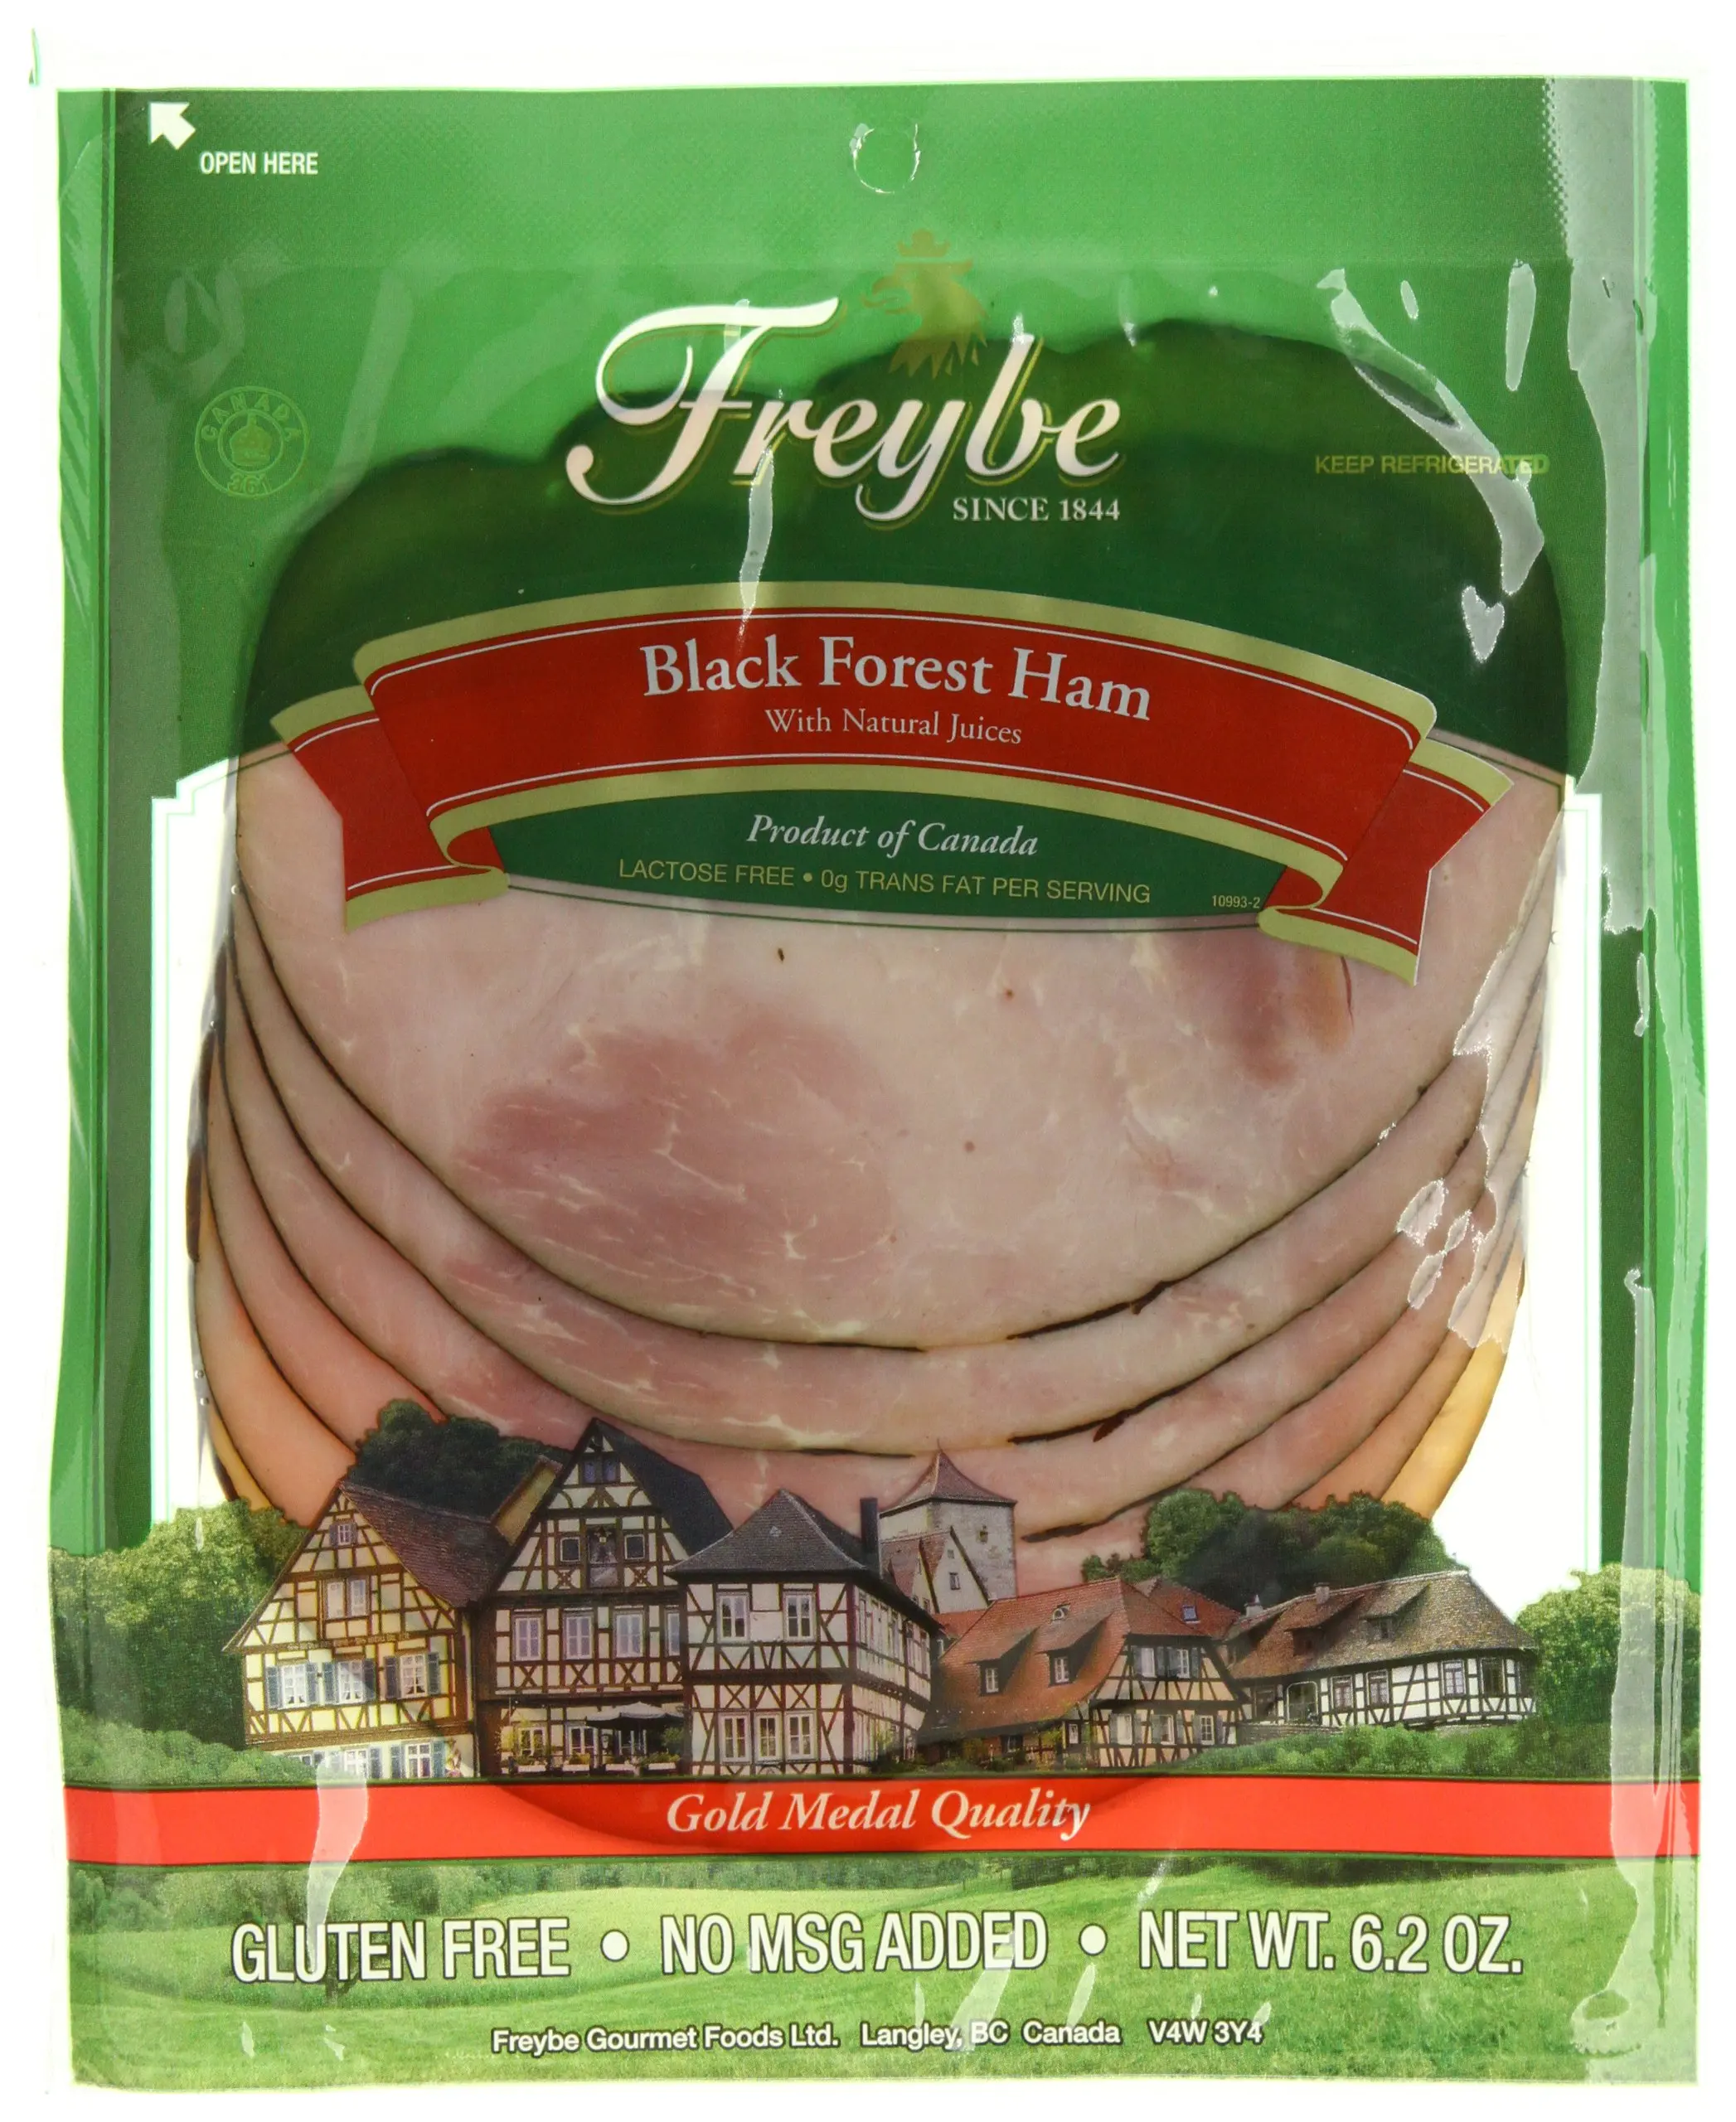 Buy Russer Sliced Black Forest Ham 16 oz in Cheap Price on Alibaba com